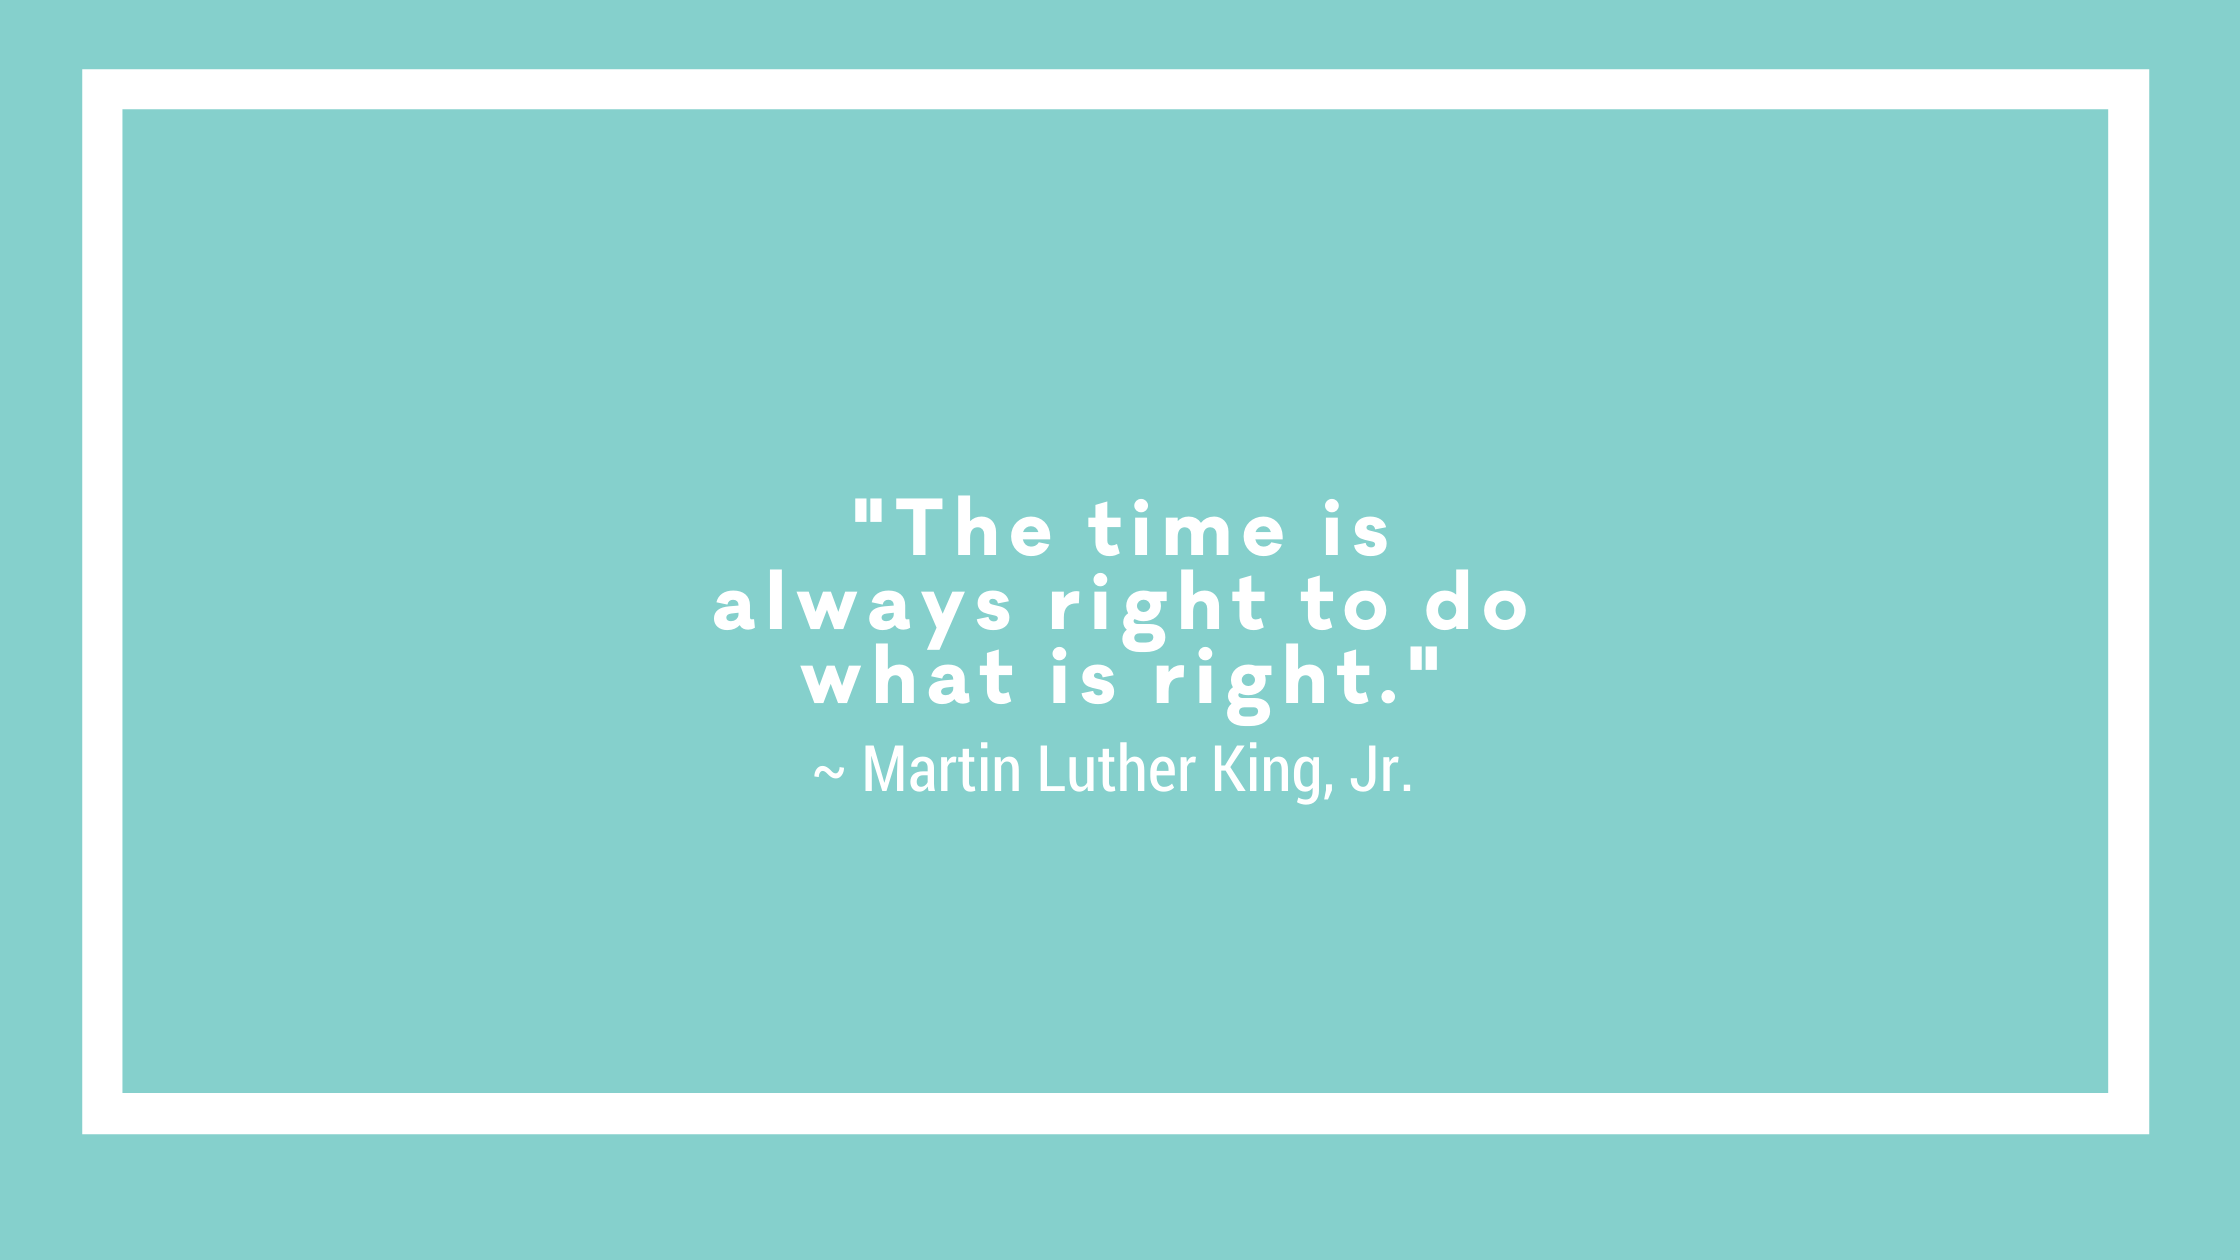 quote from Martin Luther King, Jr.